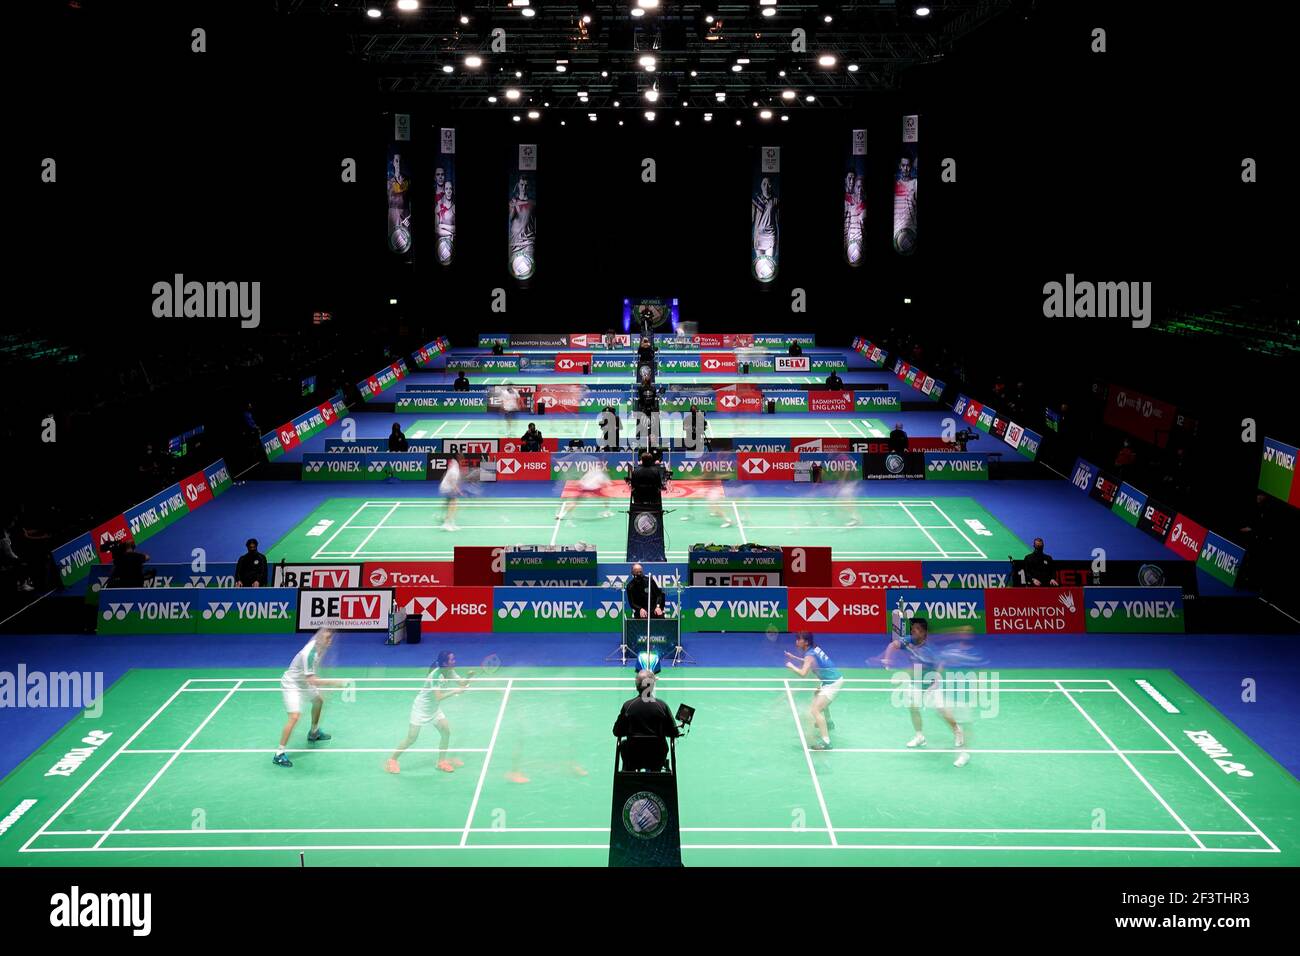 A general view of play during day one of the YONEX All England Open Badminton Championships at Utilita Arena Birmingham